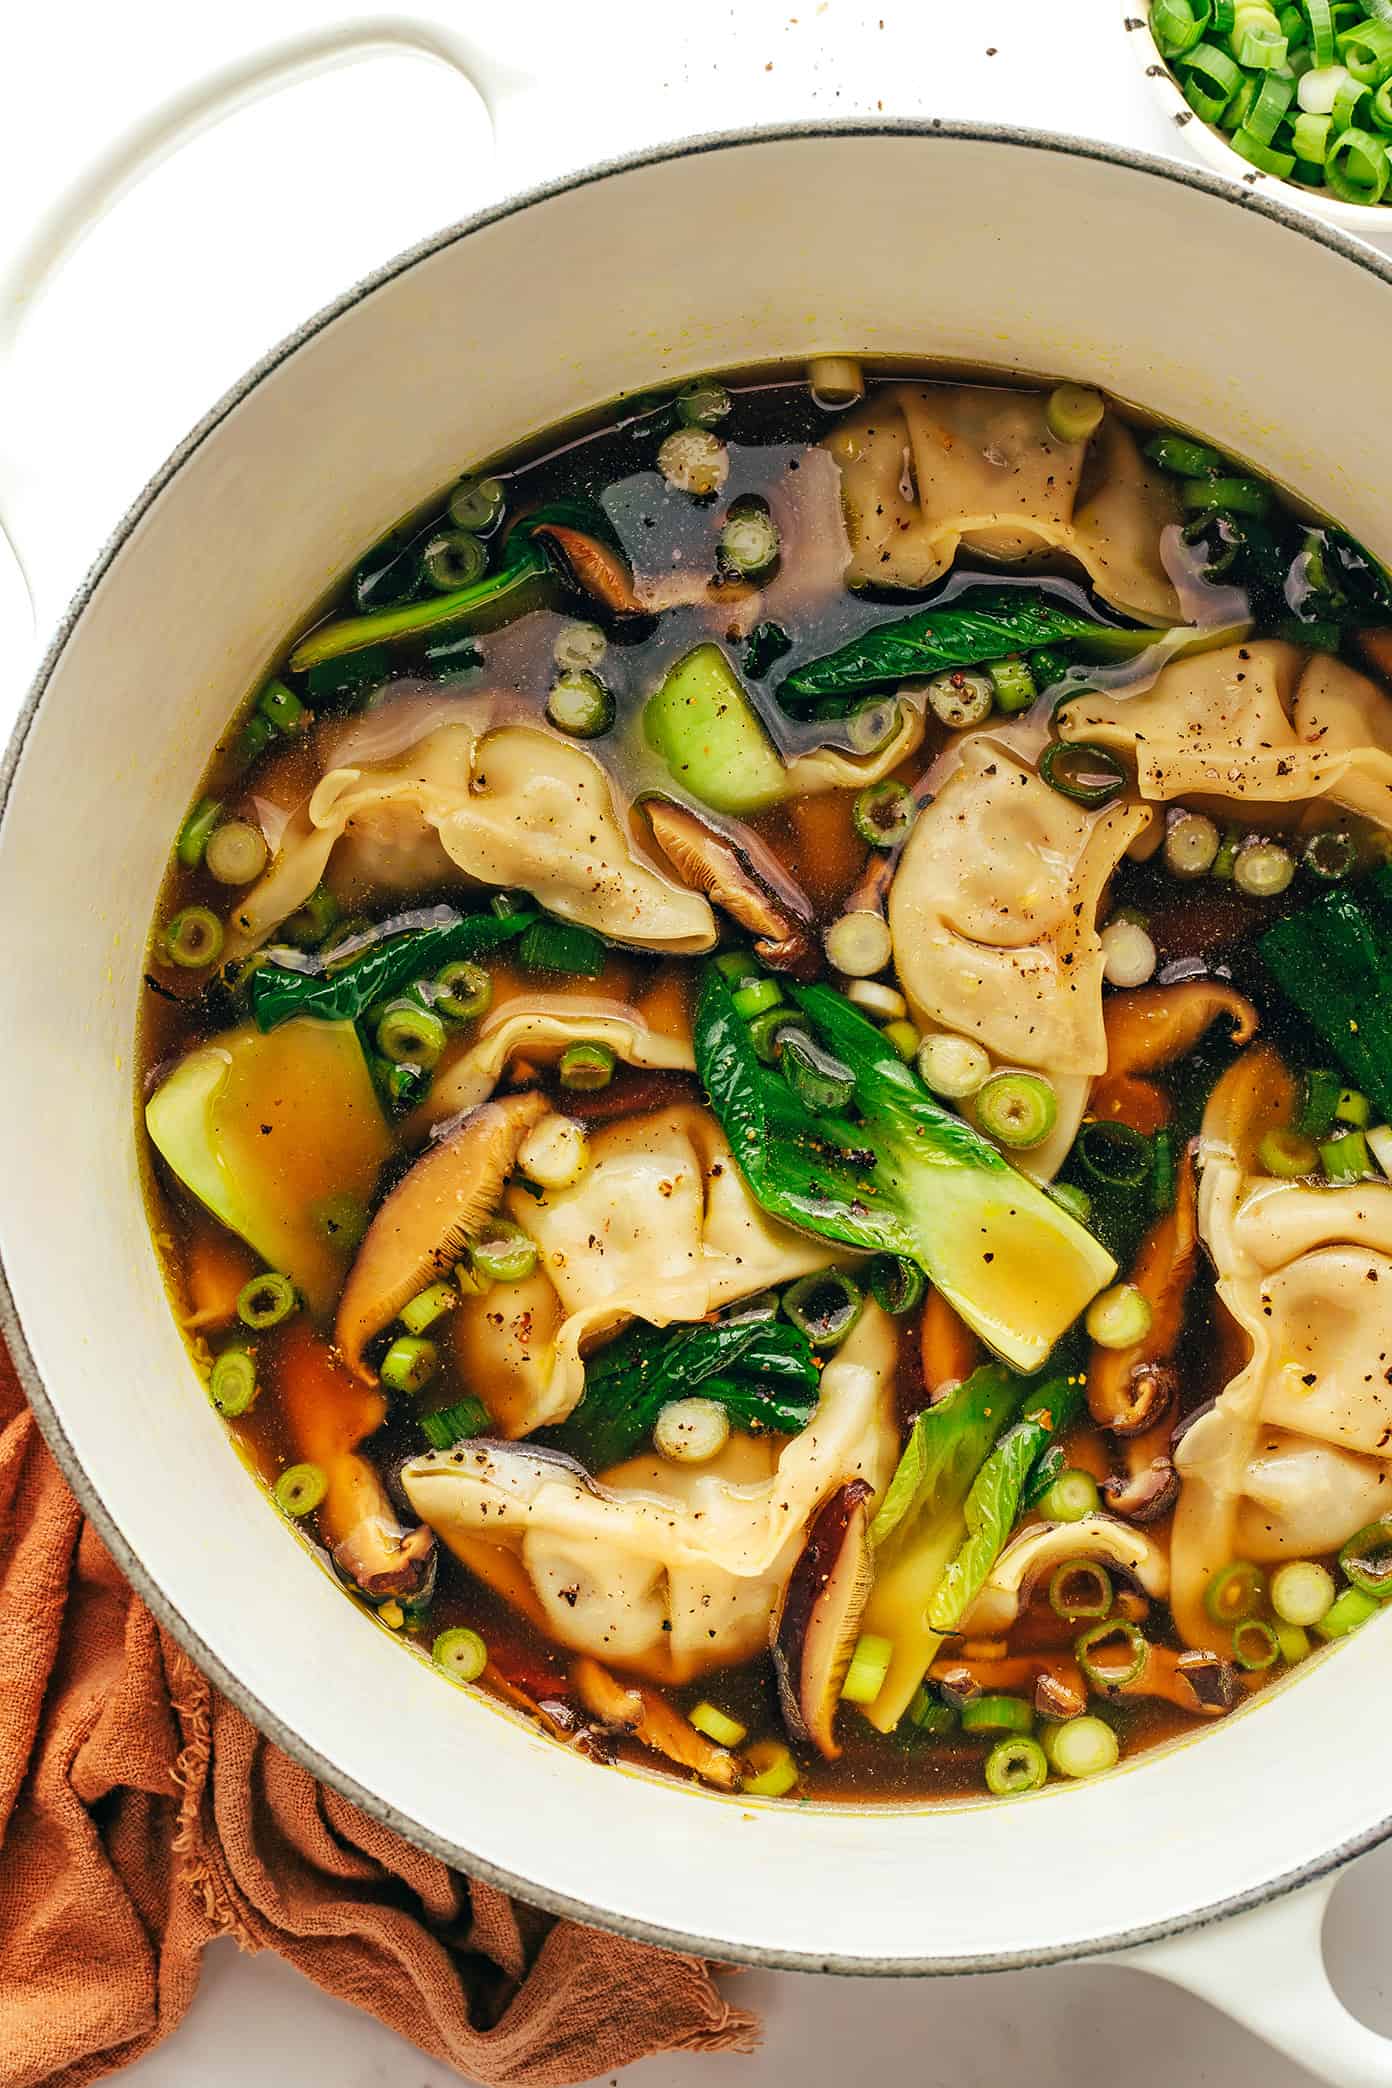 Roasted Garlic Miso Soup with Greens